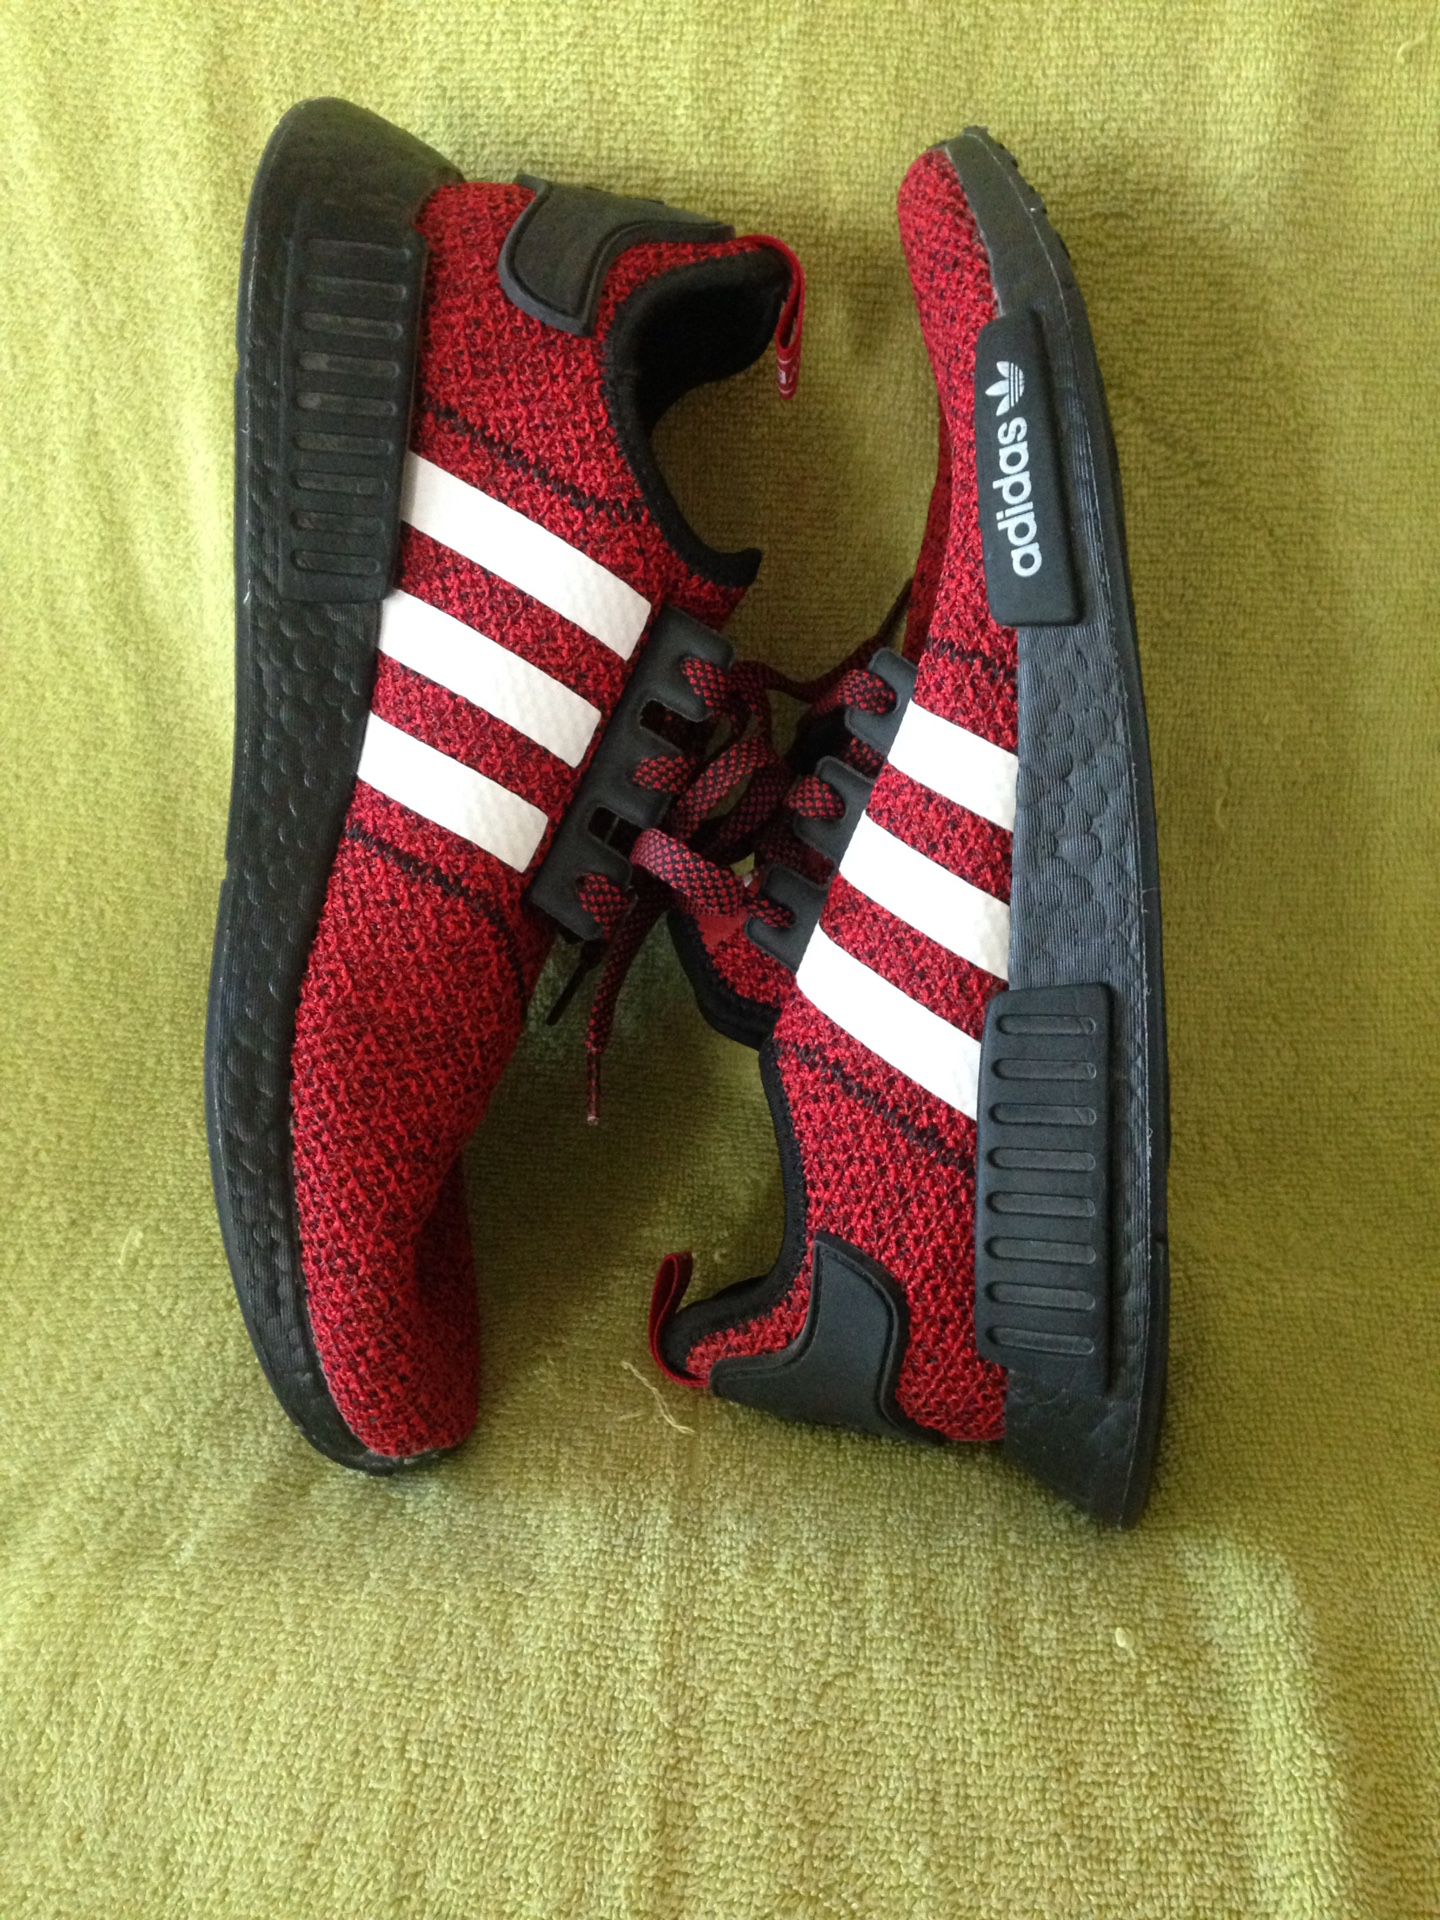 Adidas nmd r1 carbon red size 13 euc